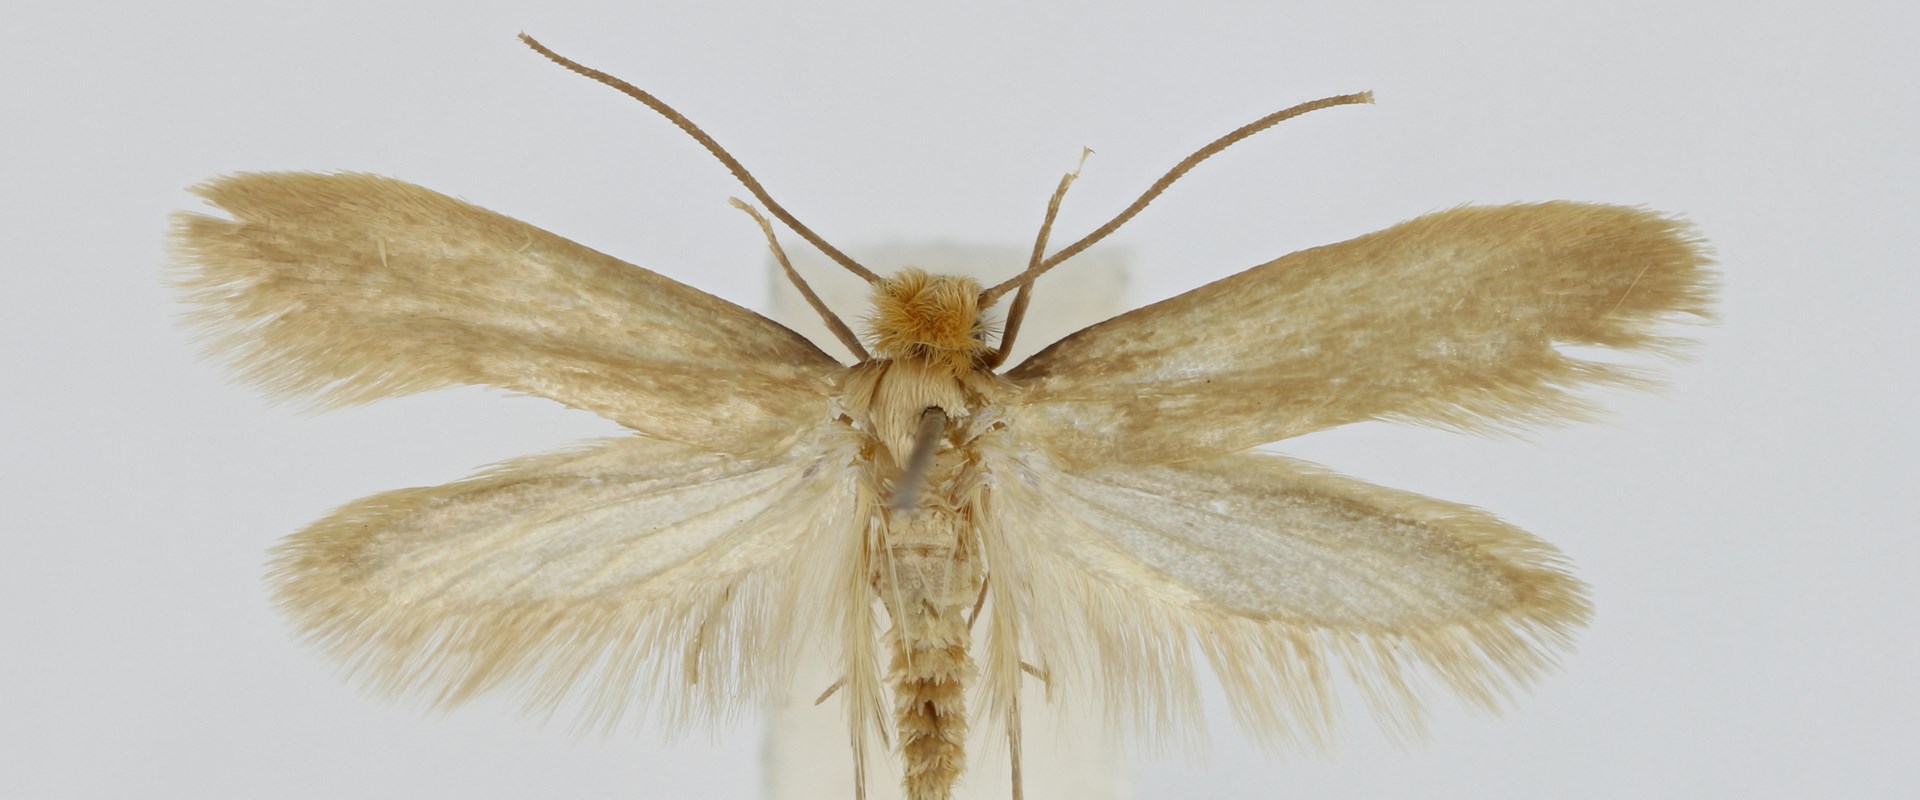 A specimen of a large winged moth lies flat.